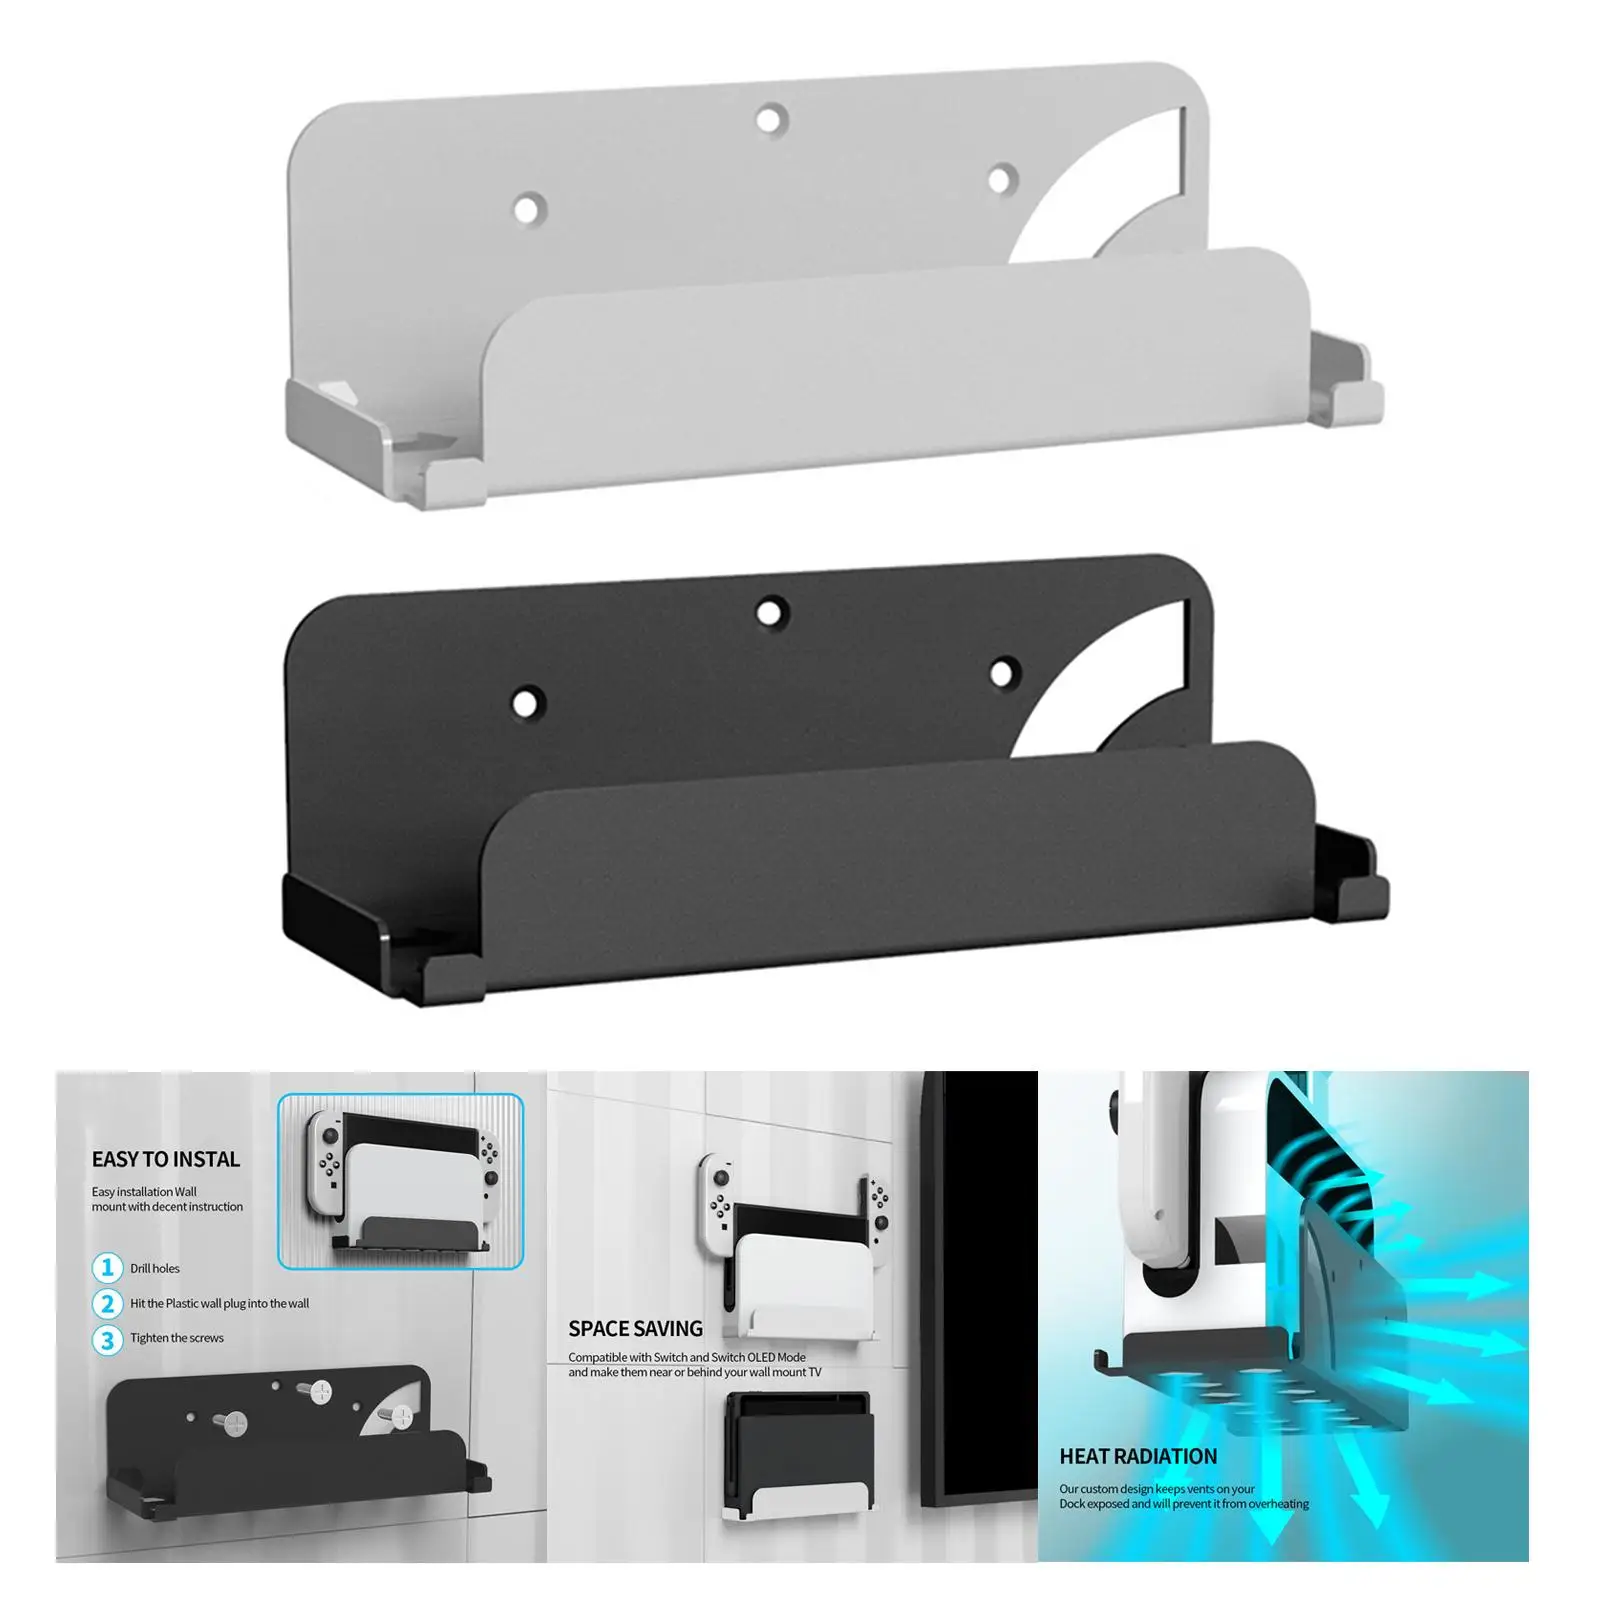 Universal Game Console Wall Mounted Holder Bracket Wall Shelf Easy to Install Durable for Entryway Storage Rack Game Console